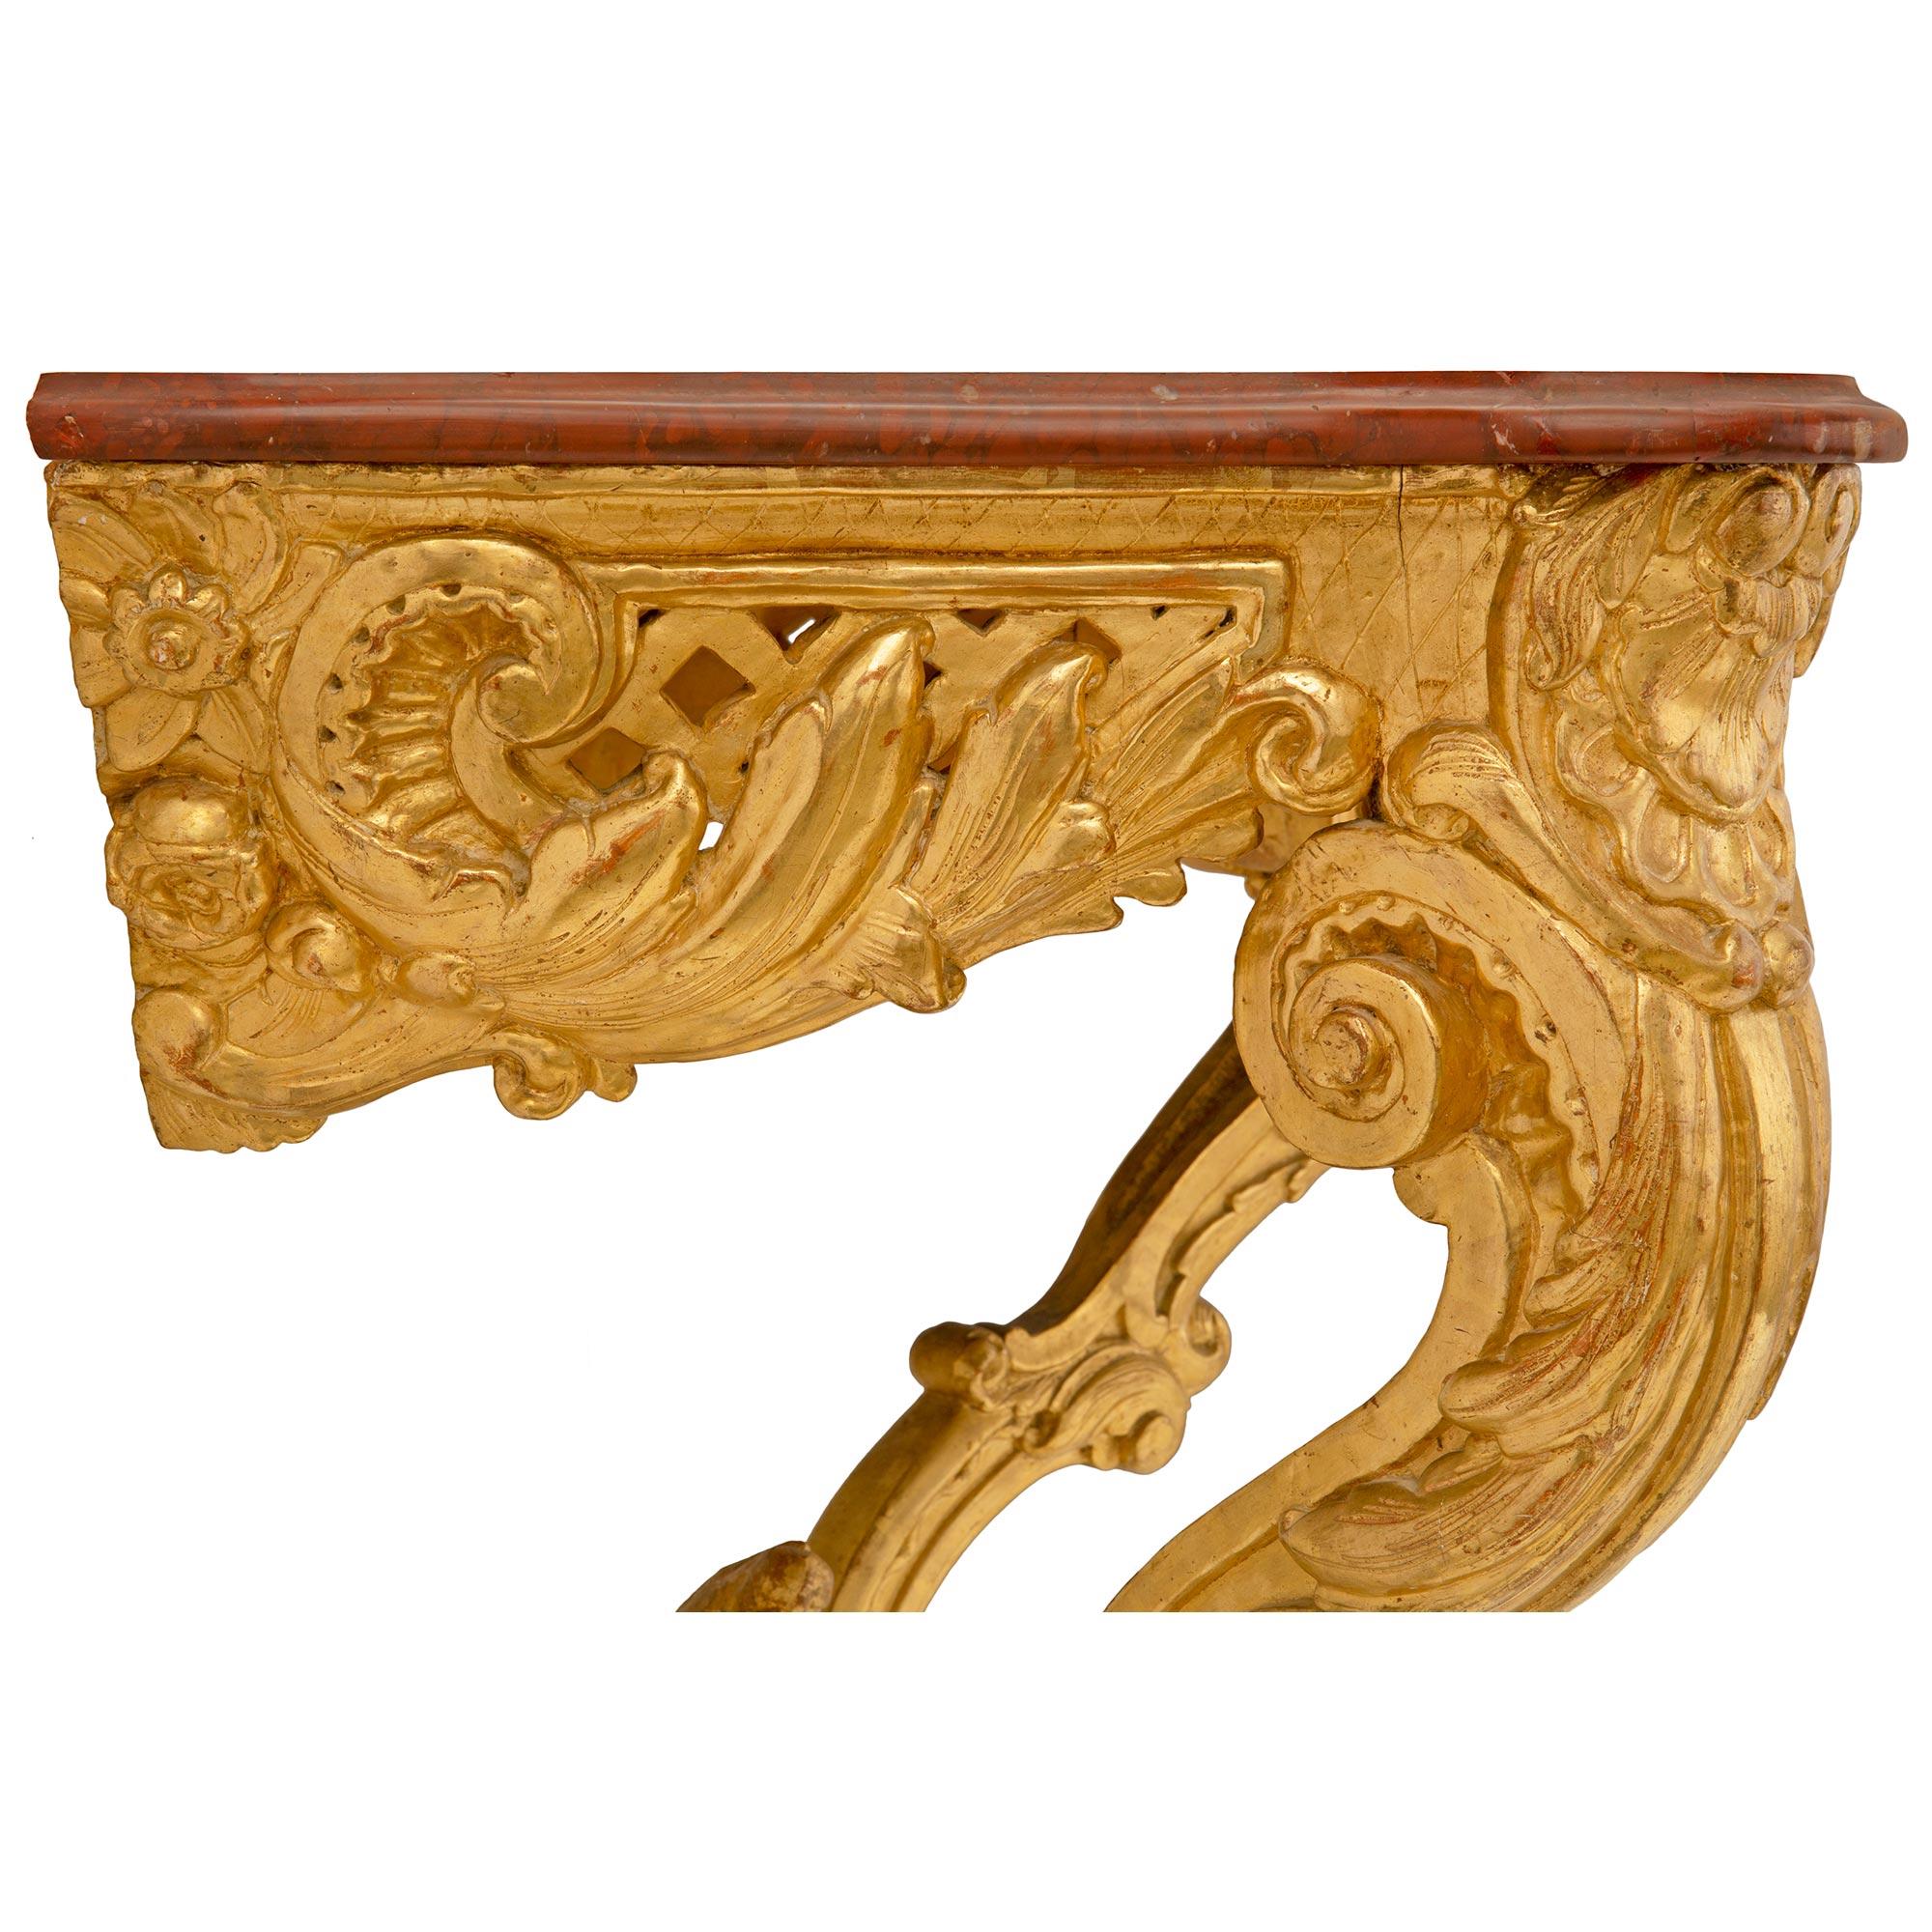 French 18th Century Regence Period Giltwood and Rouge Griotte Marble Console For Sale 3